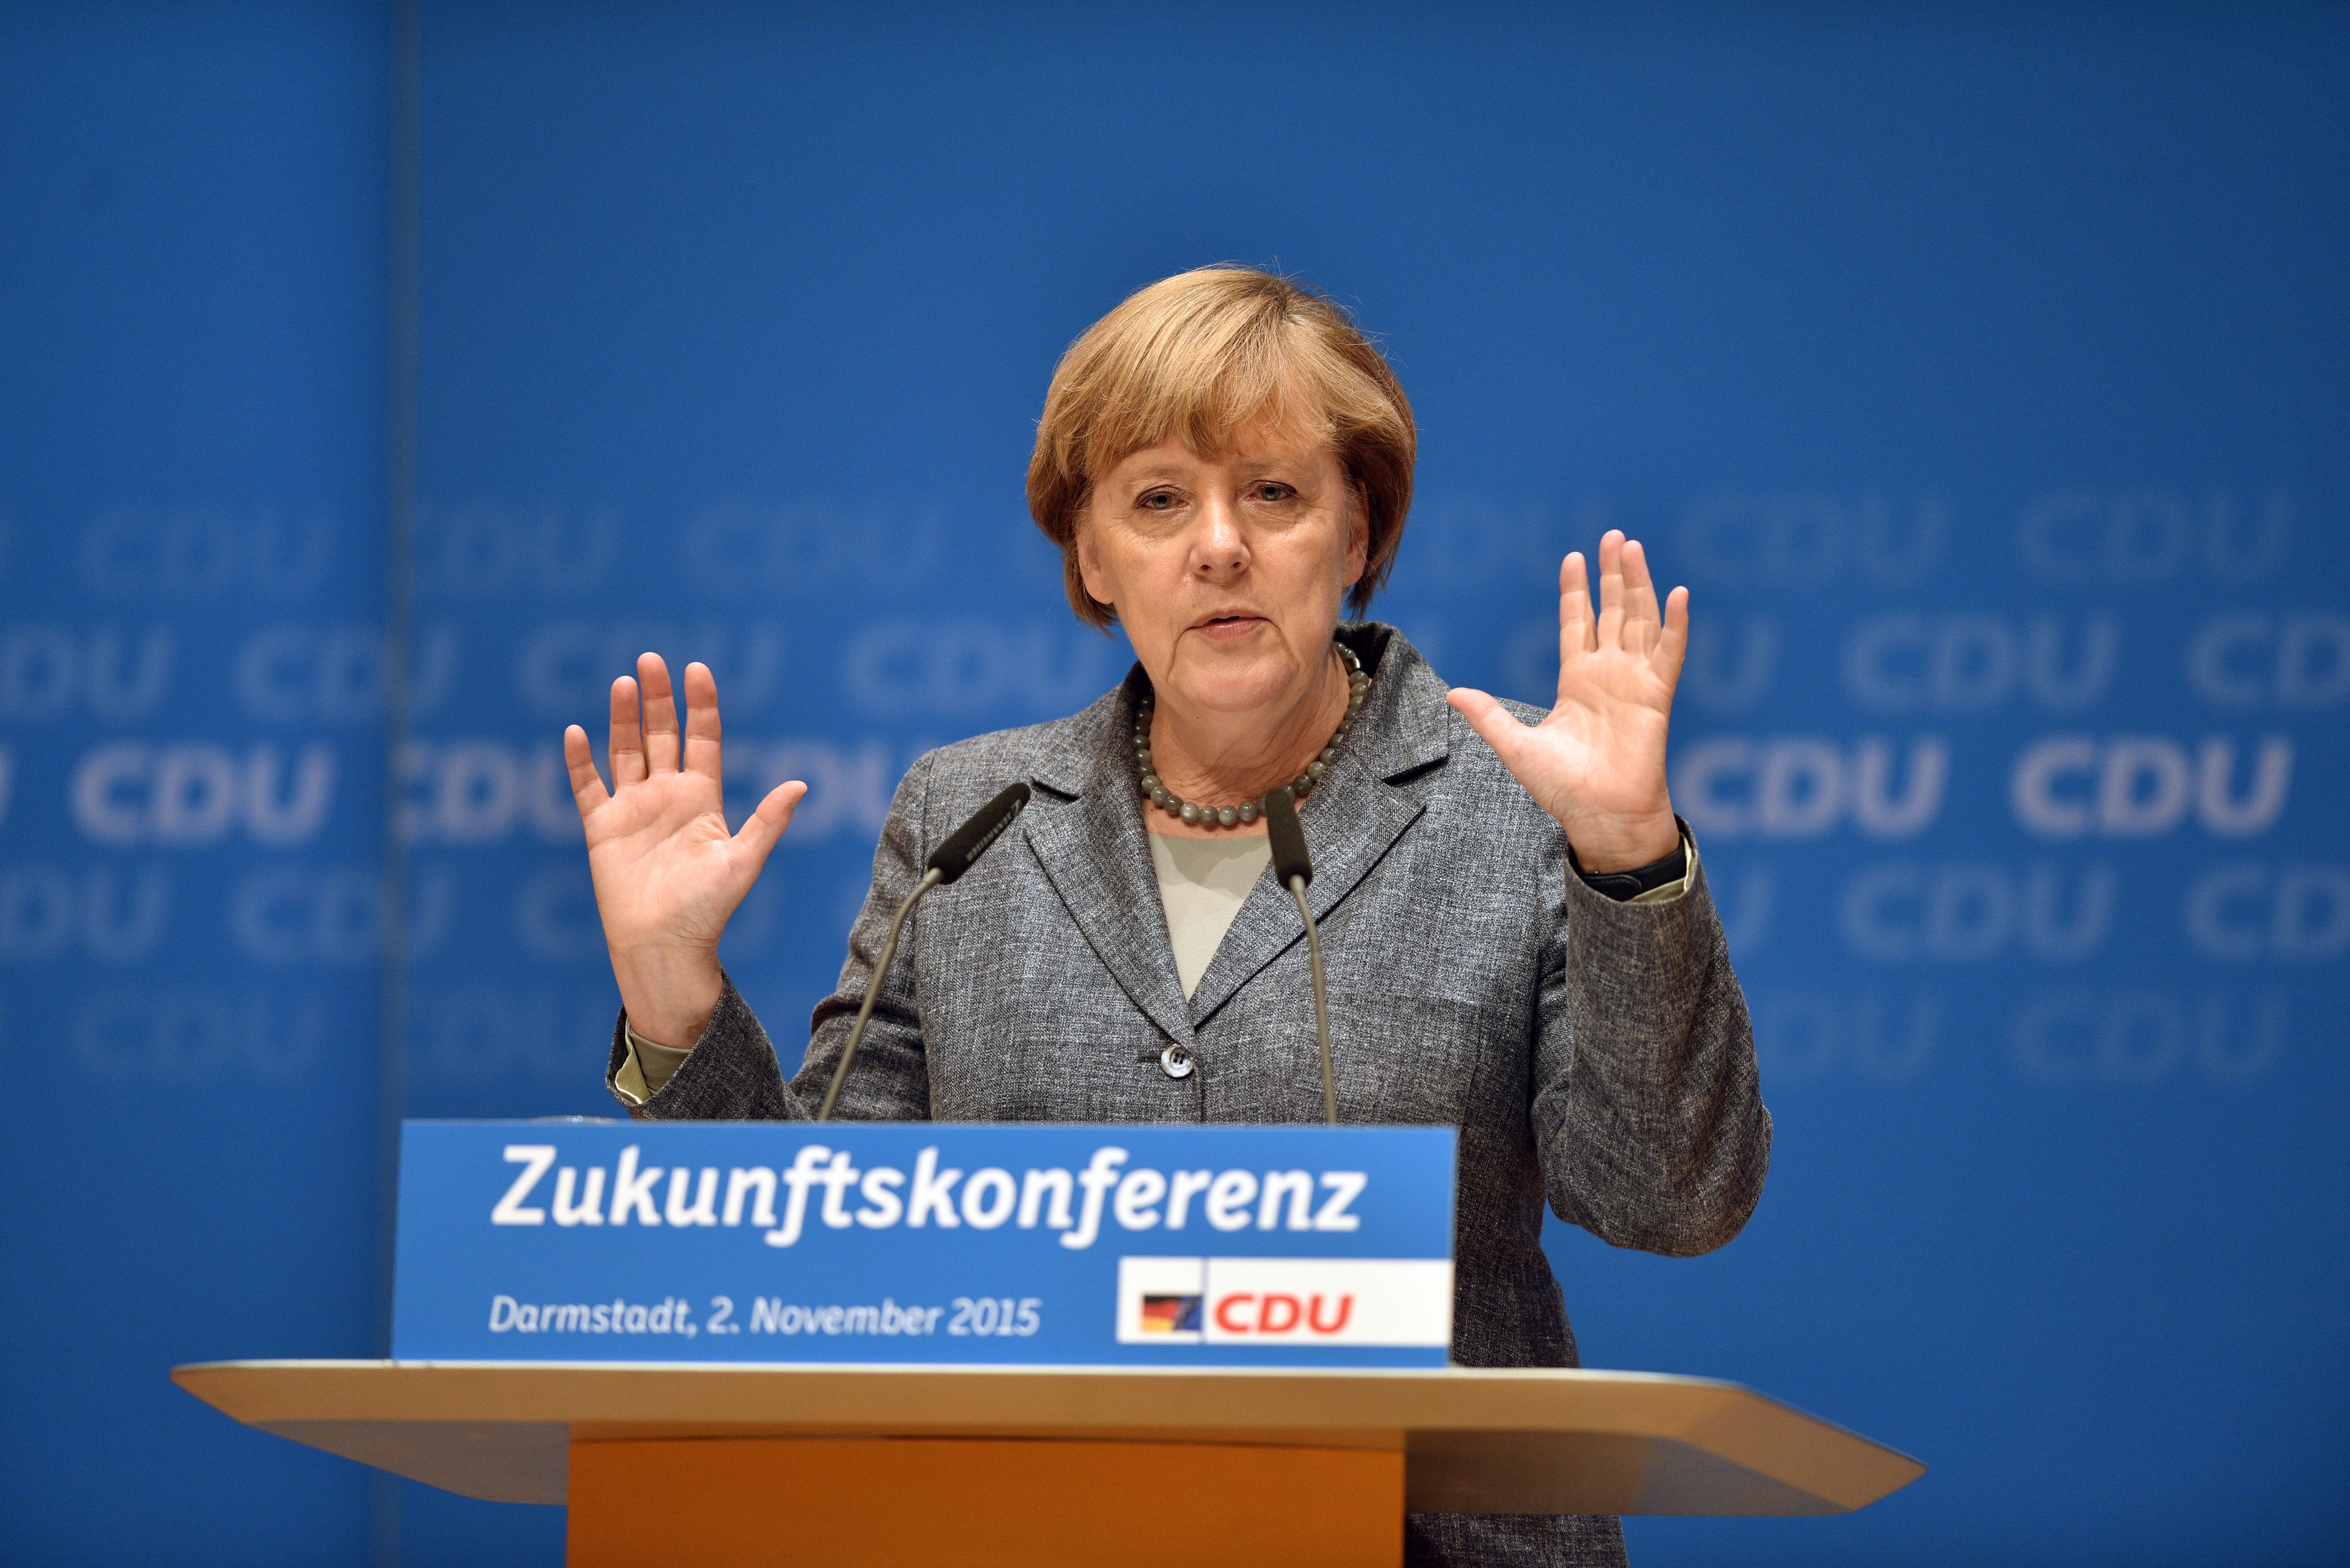 German Chancellor and Chairwoman of the German Christian Democrats (CDU) Angelika Merkel speaks to CDU members while attending a regional "Future Conference" on Nov. 2, 2015 in Darmstadt, Germany.